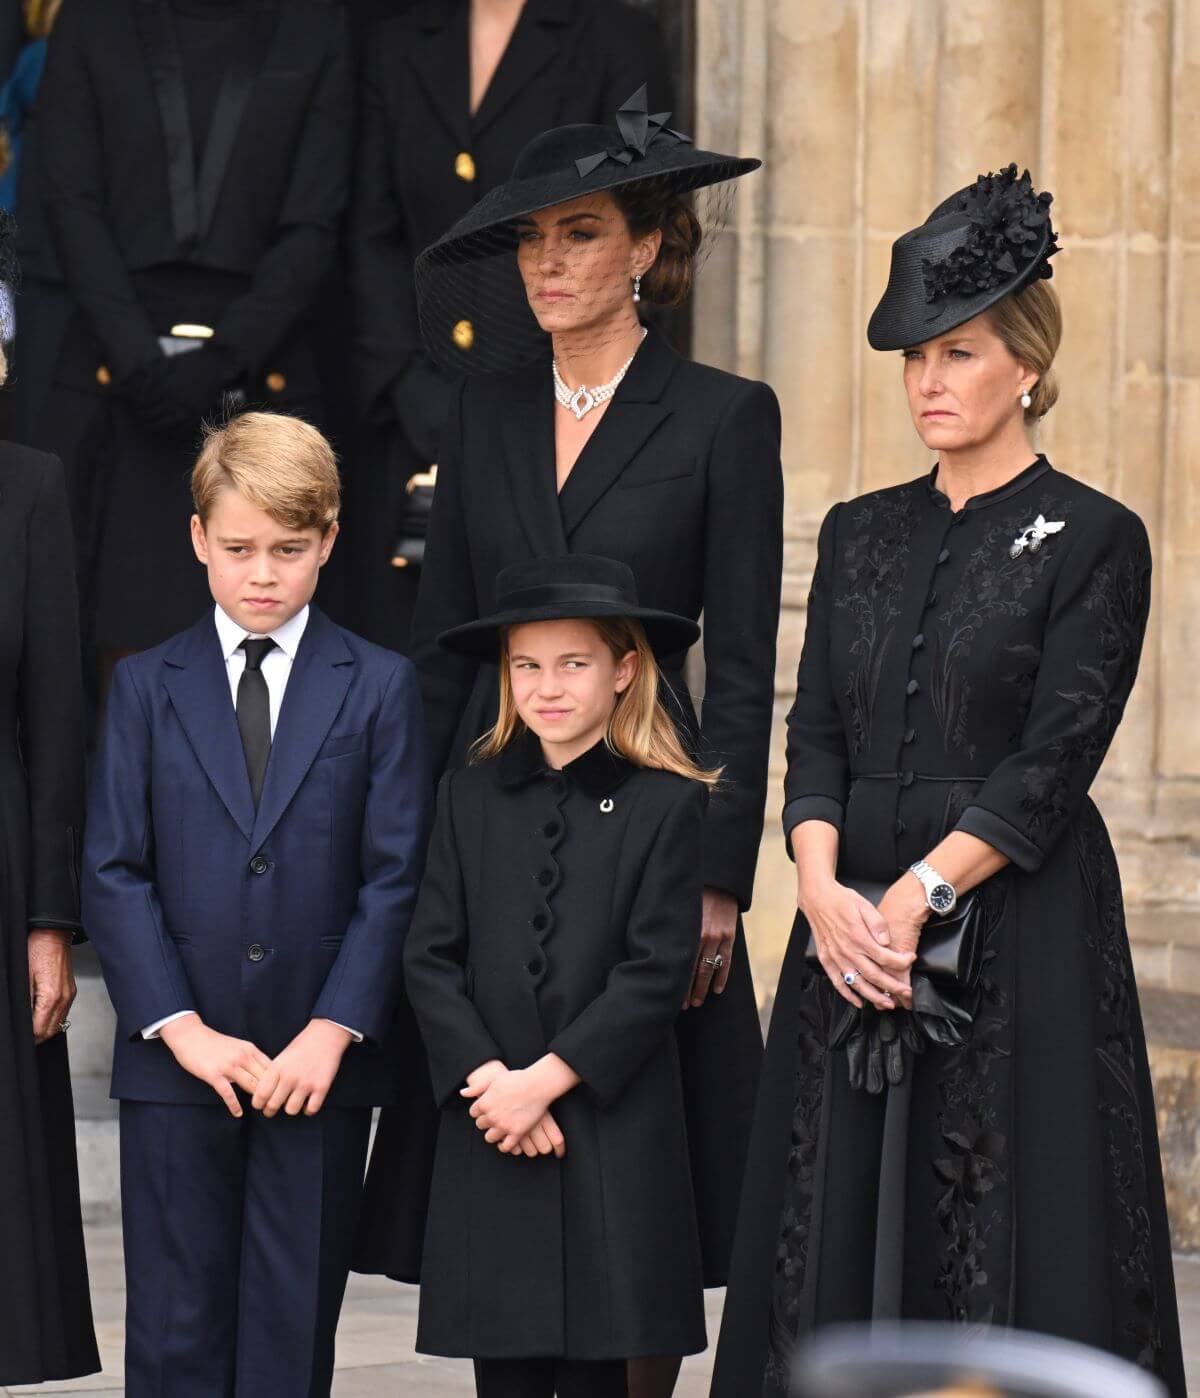 Prince George, Kate Middleton, Princess Charlotte, and Sophie during the State Funeral of Queen Elizabeth II